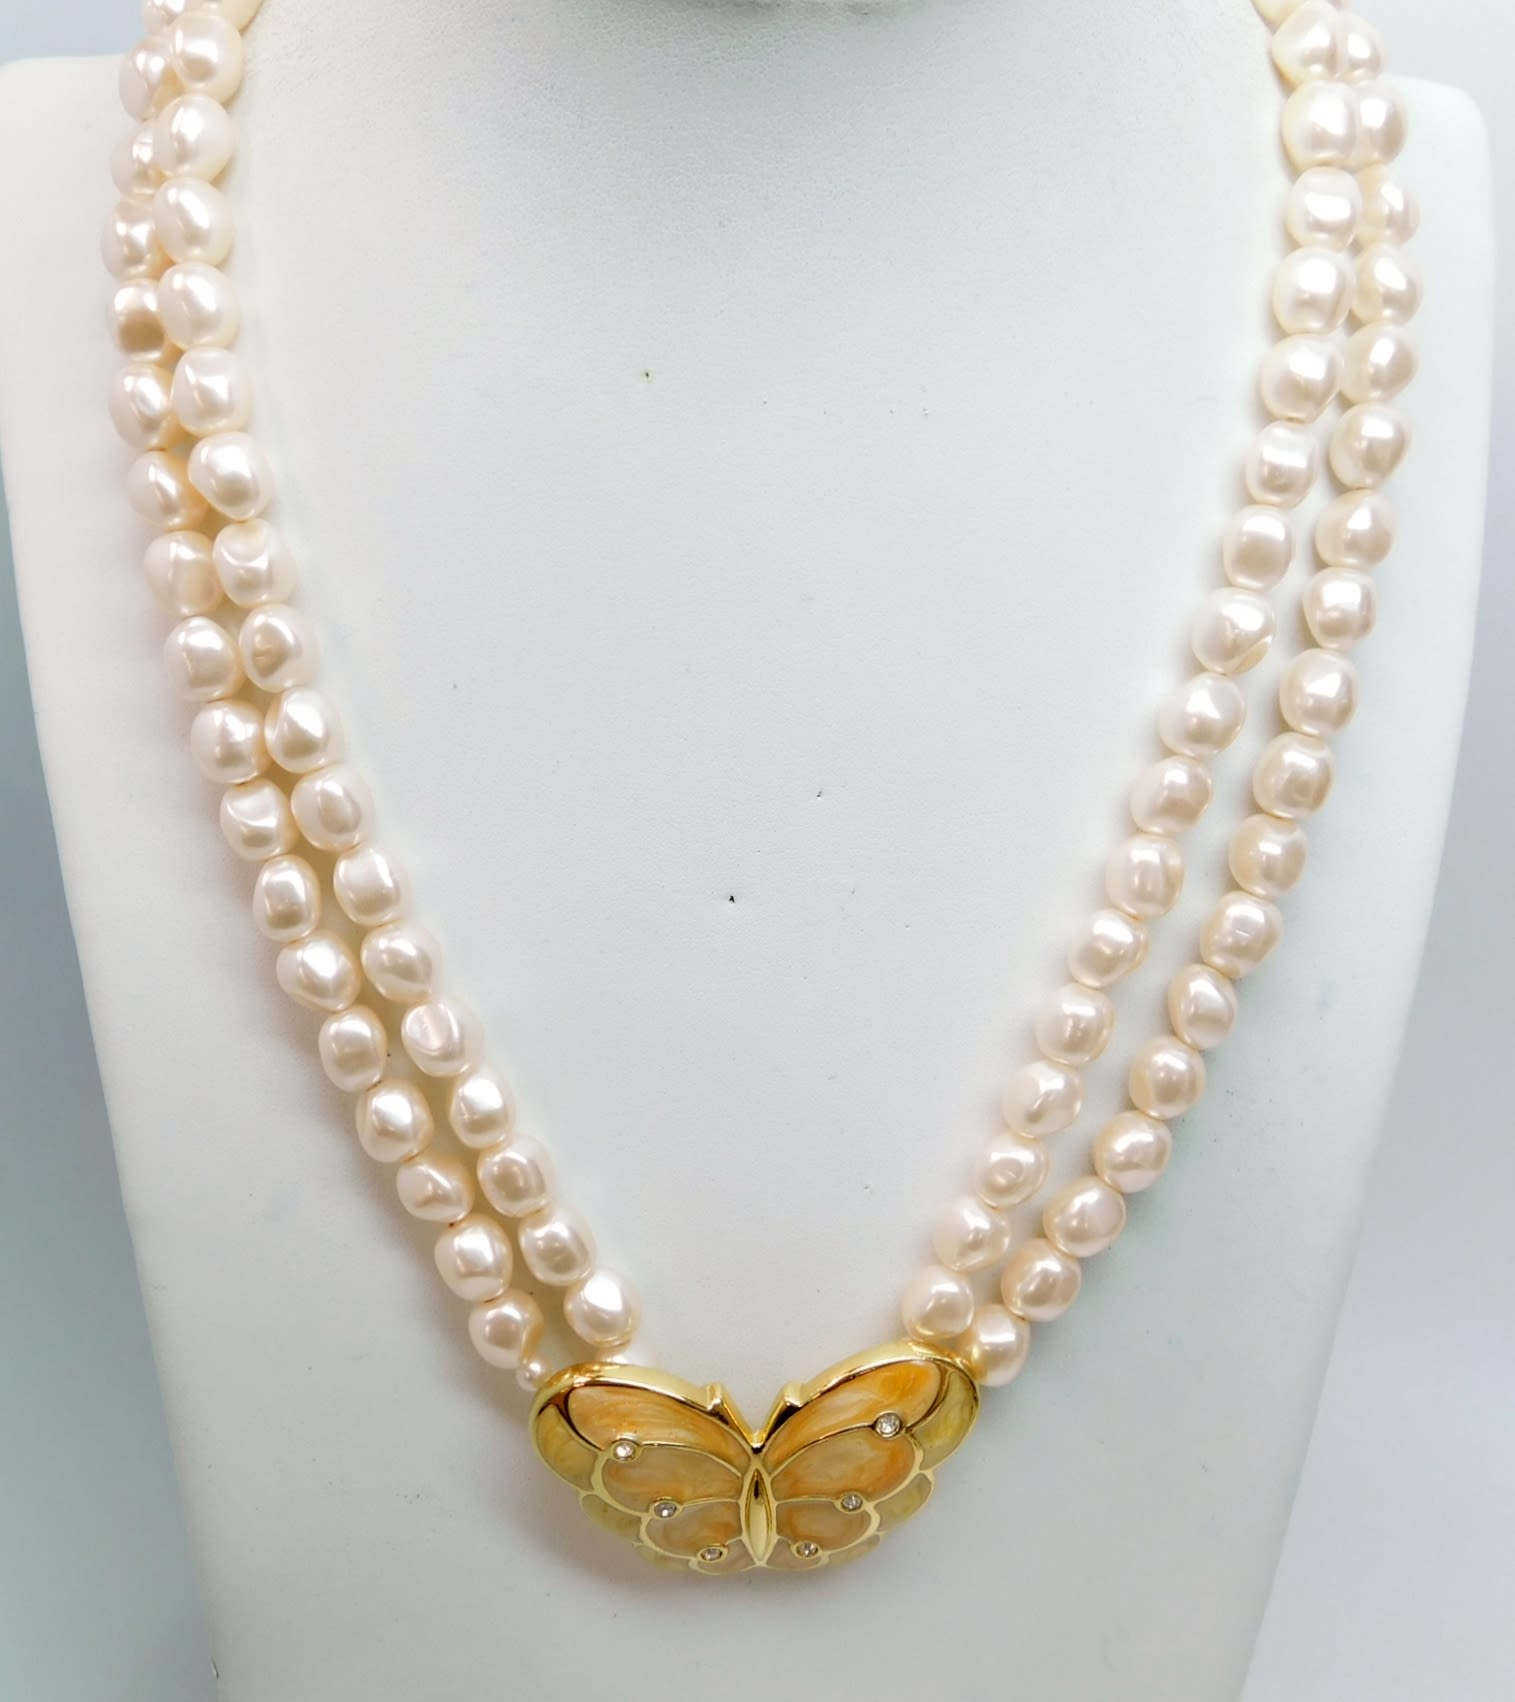 NEW Vintage Avon Pearl Necklaces, Multi 3 Chain Fresh Water Pearls  Saltwater Pearls, Cameo Design Chain, White Metal Chain, Fashion Jewelry -  Etsy Norway